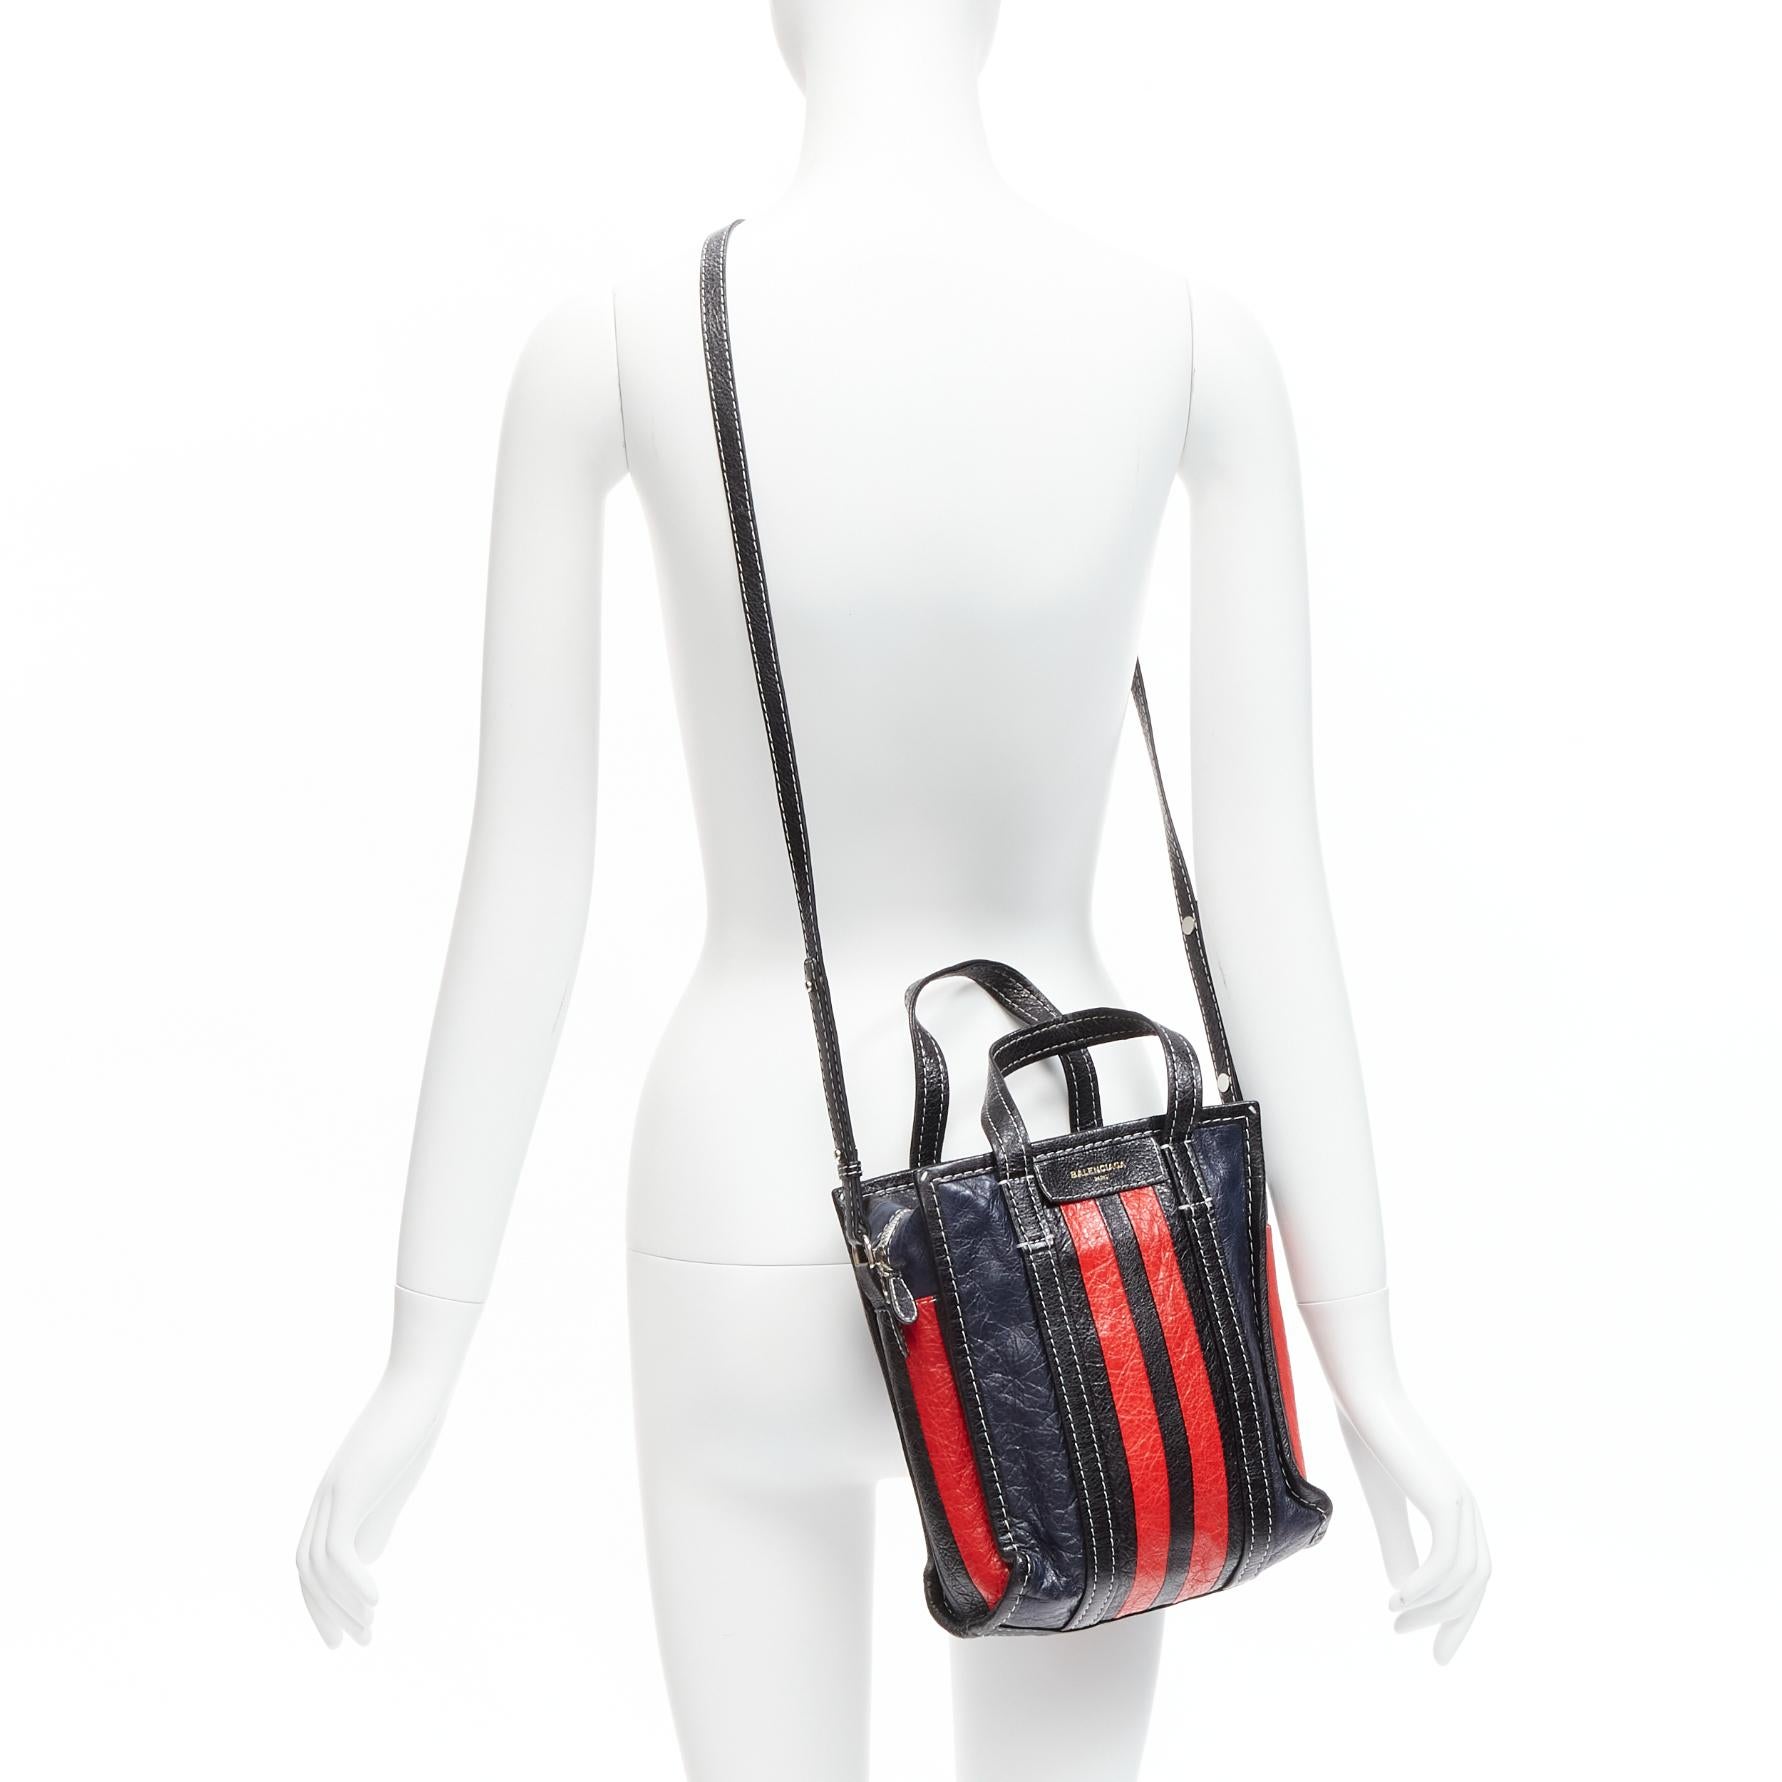 BALENCIAGA Bazar navy red striped leather top handle crossbody bag
Reference: JYLM/A00042
Brand: Balenciaga
Designer: Demna
Model: Bazar
Material: Leather
Color: Navy, Red
Pattern: Striped
Closure: Zip
Lining: Black Fabric
Extra Details: Leather